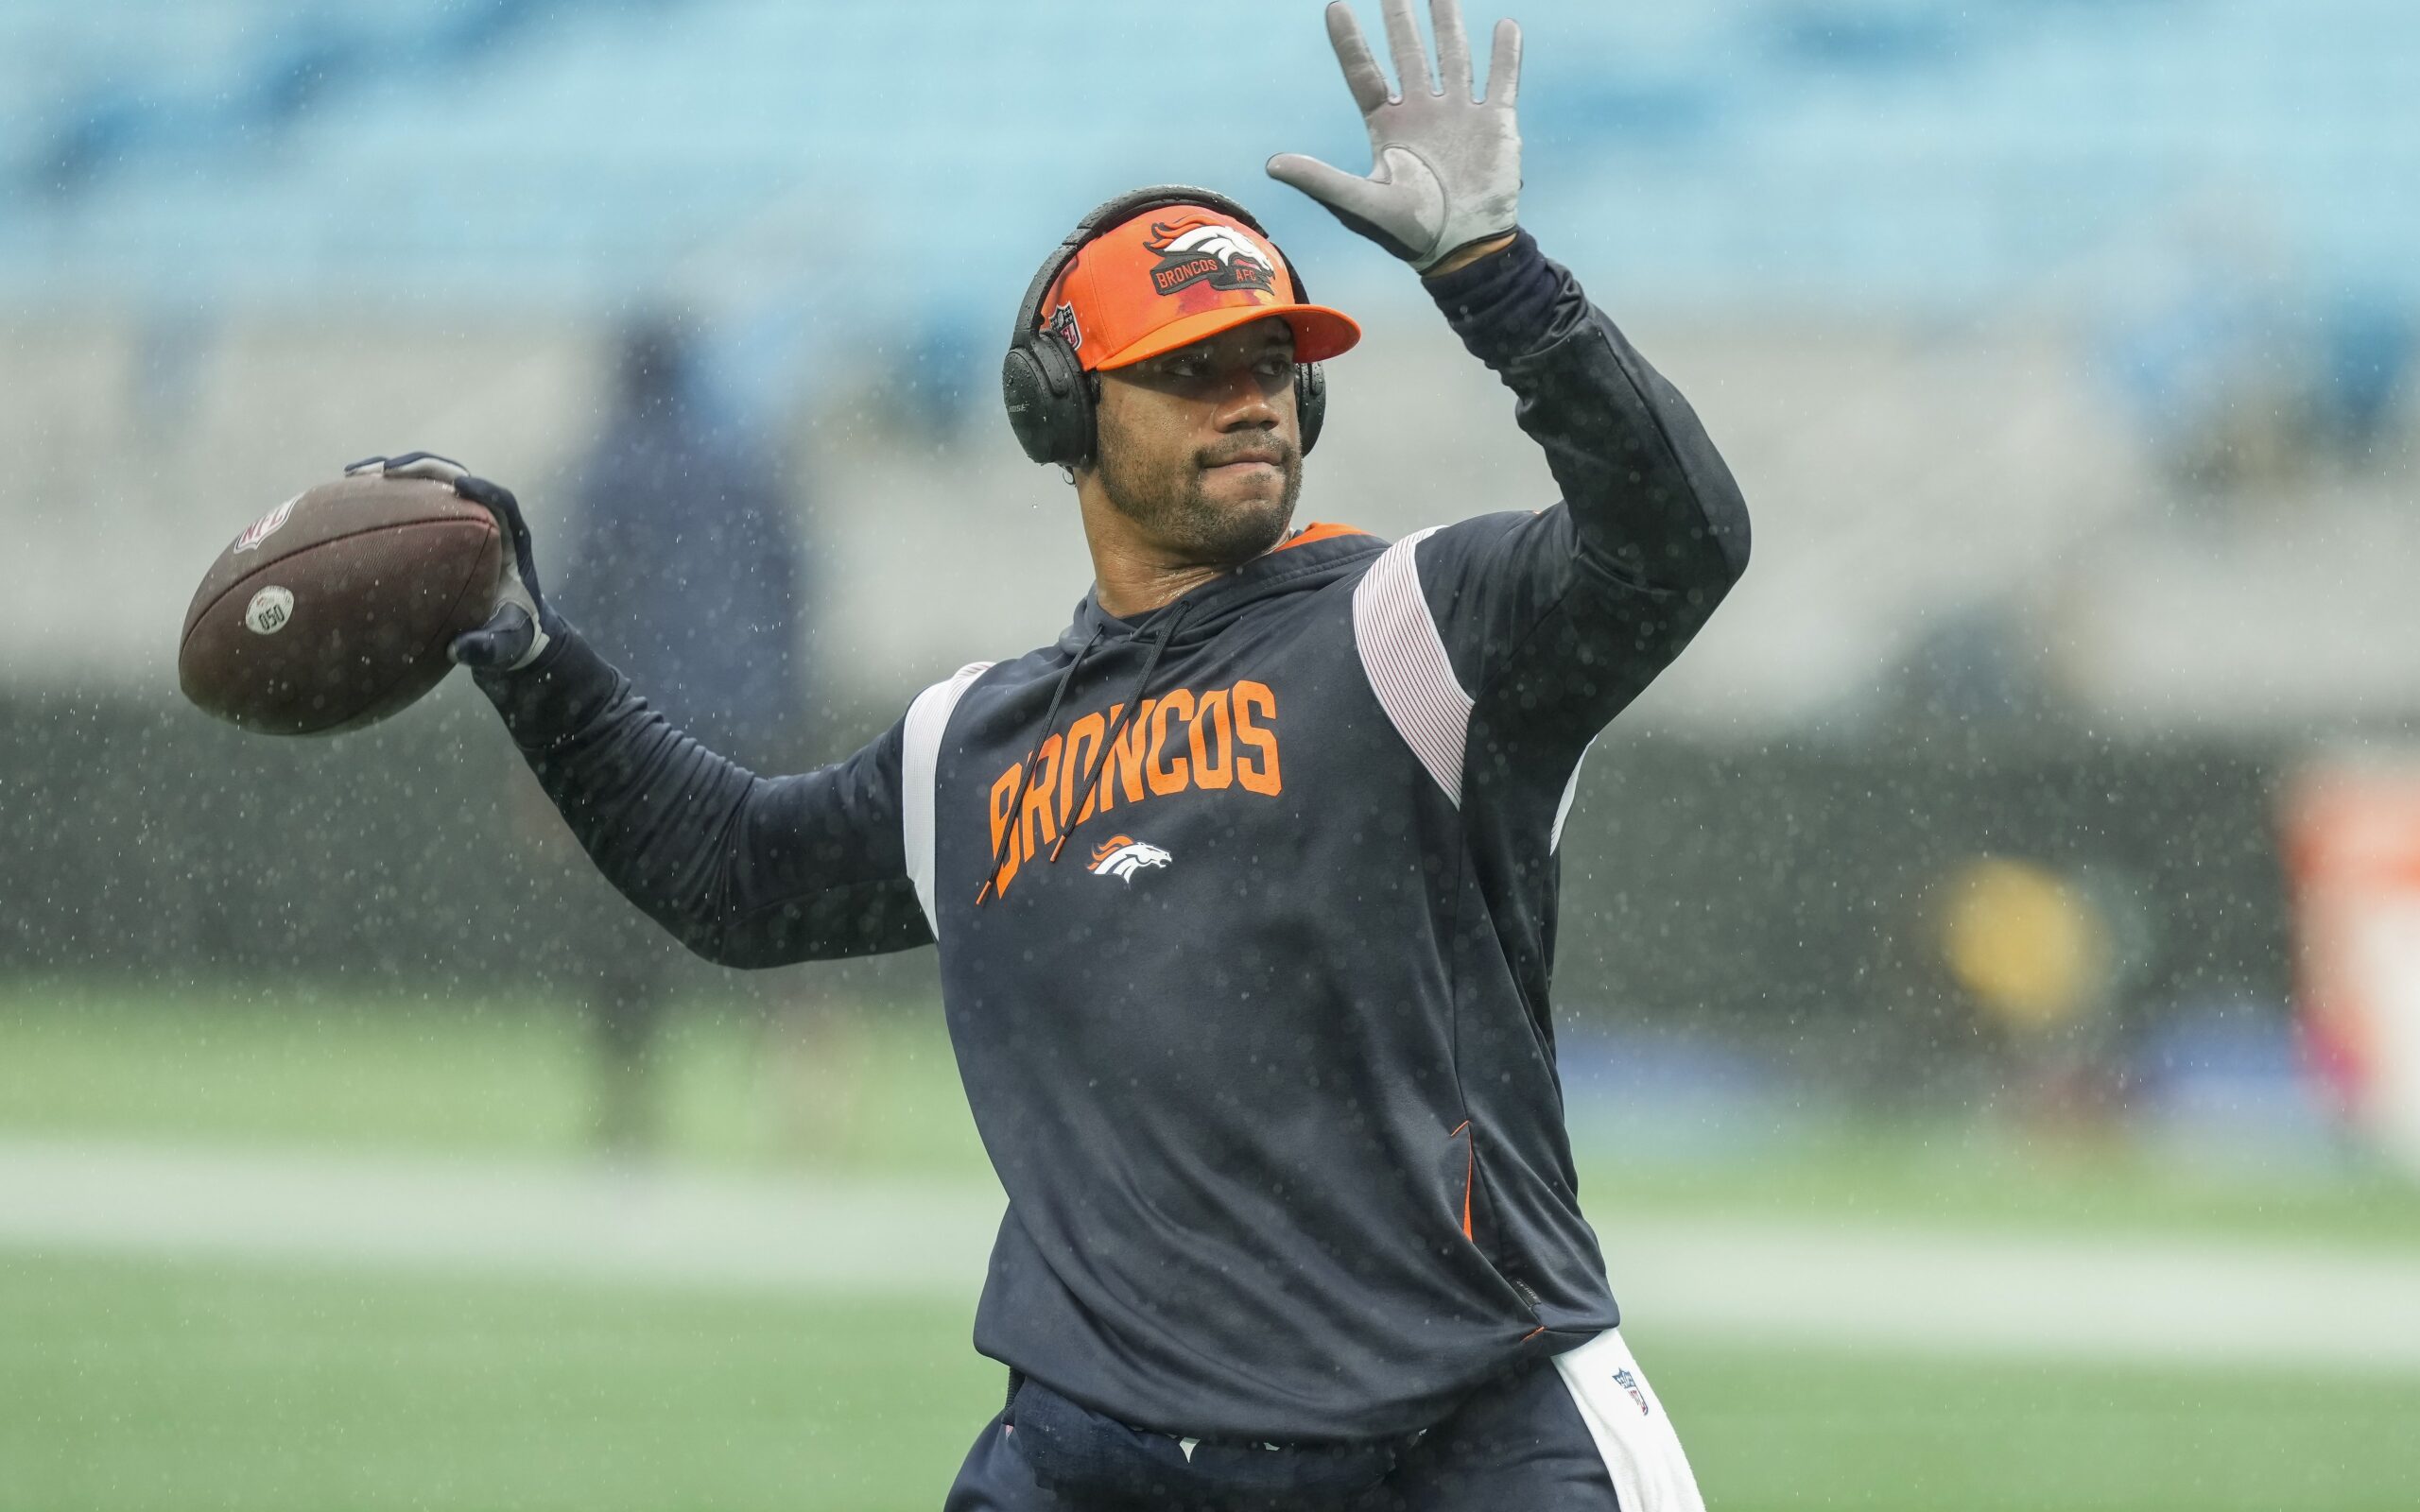 Everything Russell Wilson said about heated Broncos sideline exchange